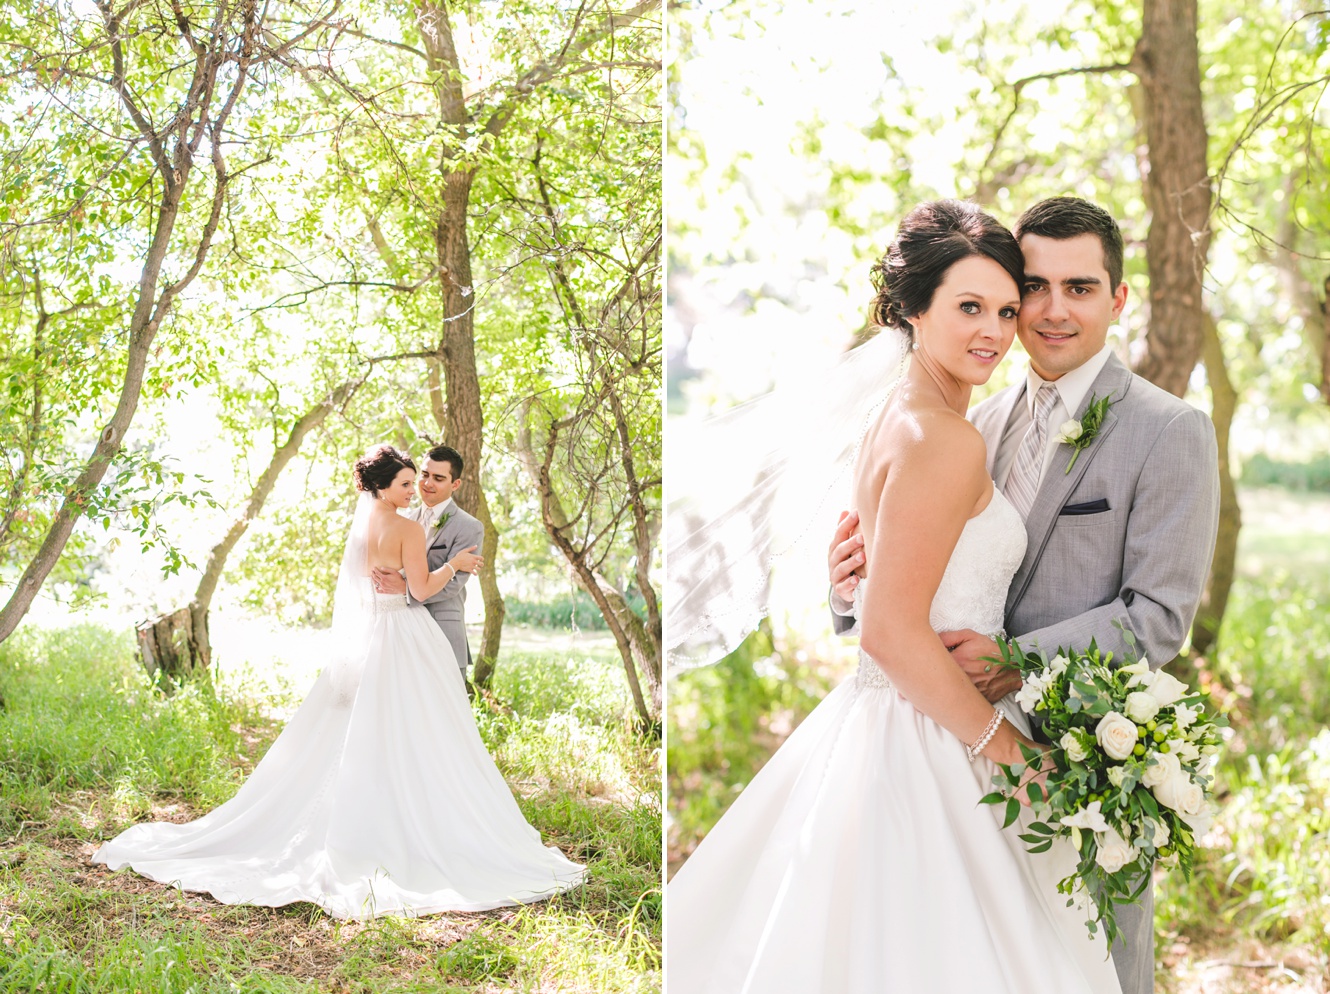 Fairytale wedding pictures